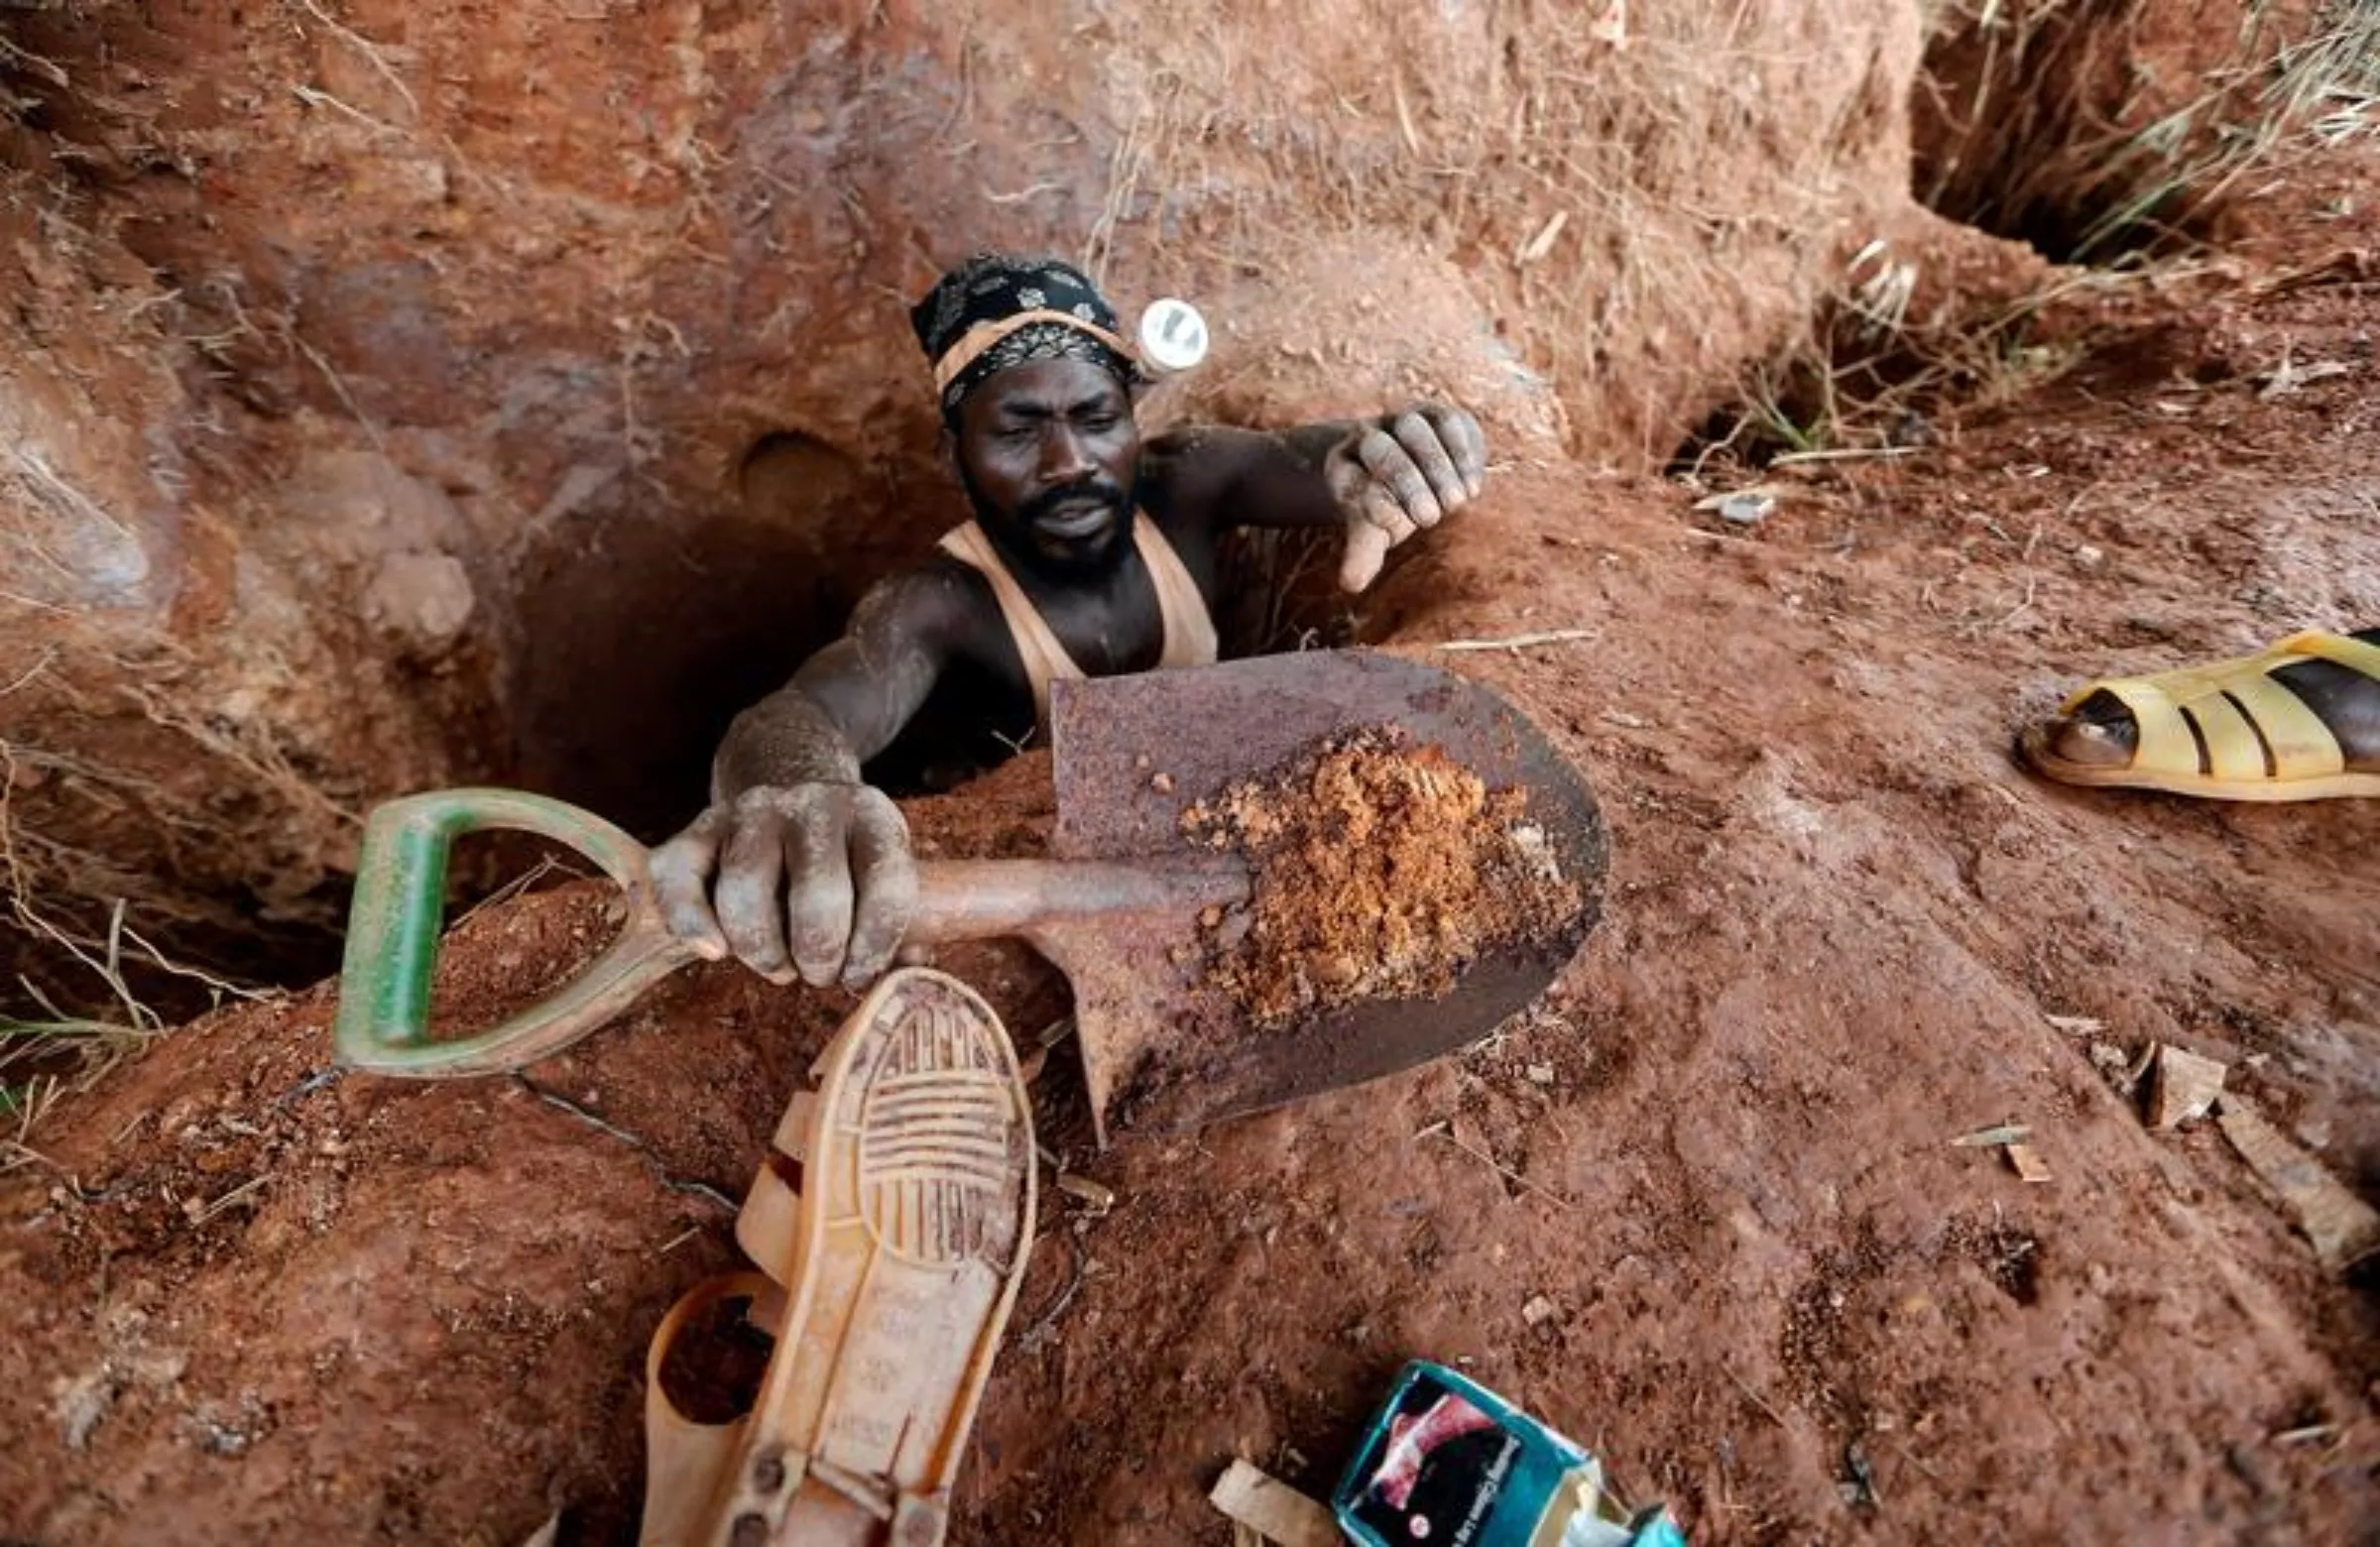 An informal gold miner carries a shovel as he climbs out from inside a pit at the site of Nsuaem-Top, Ghana, November 24, 2018. REUTERS/Zohra Bensemra